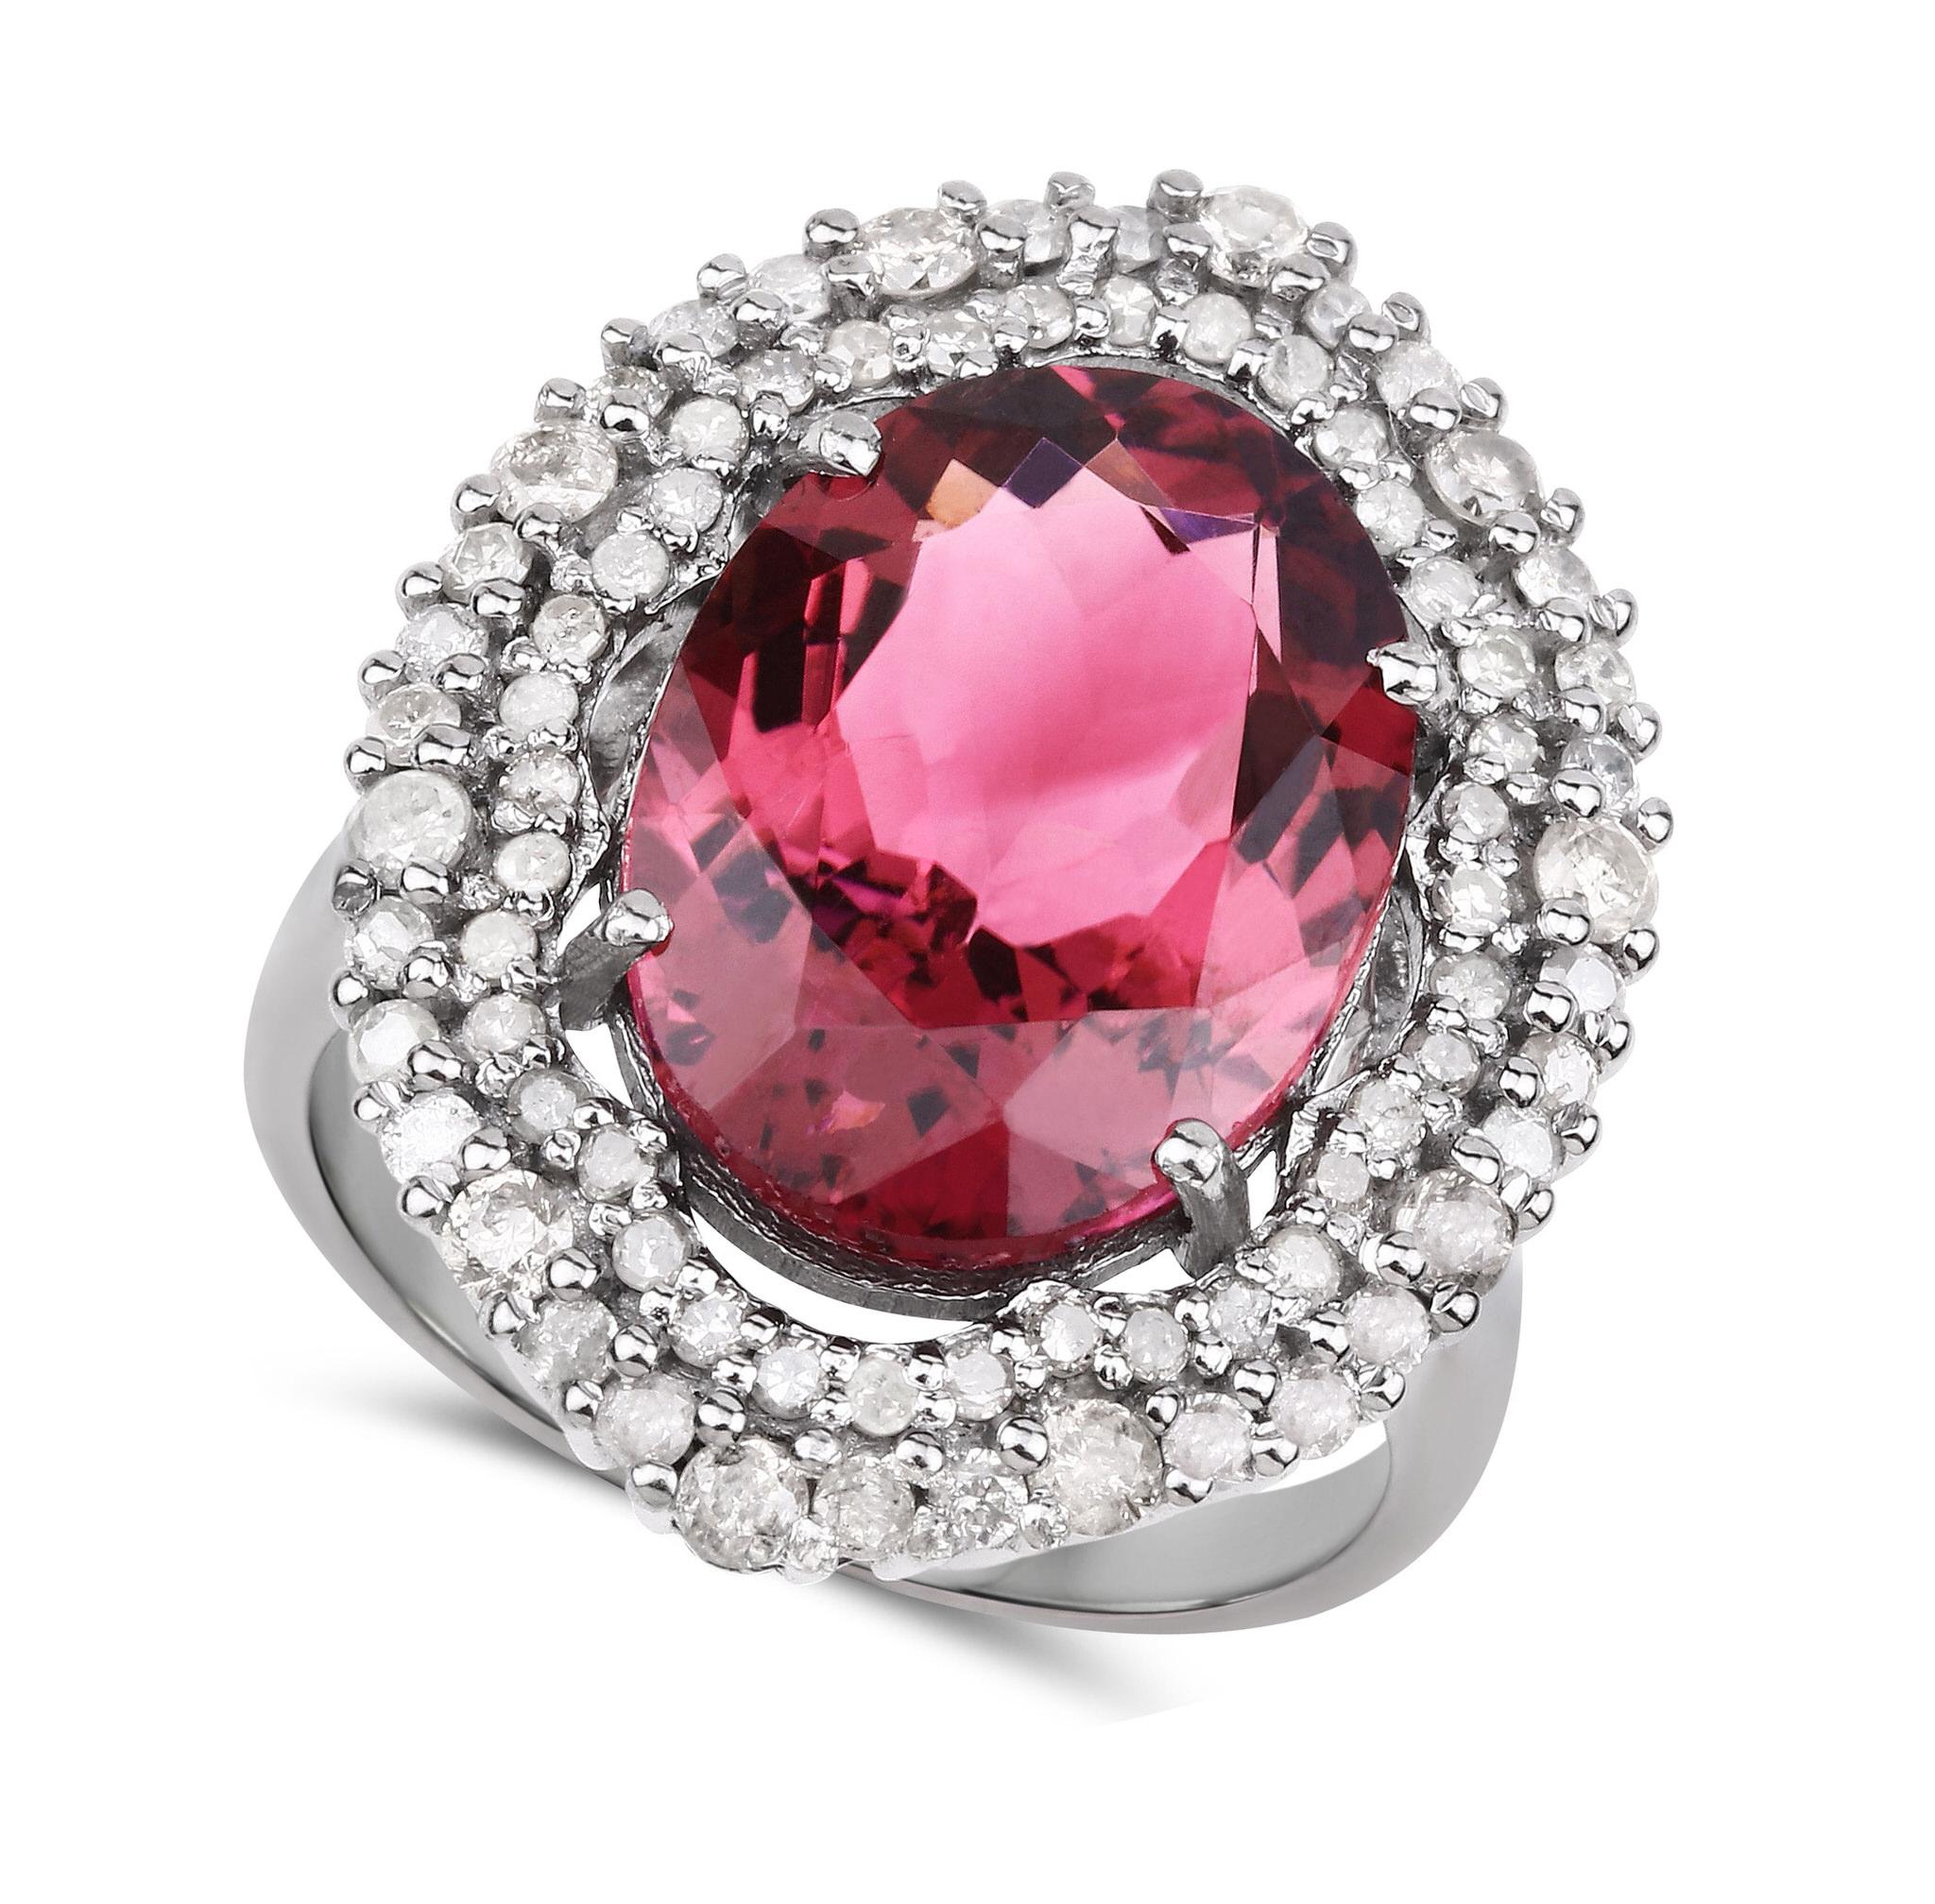 Oval Cut Natural Pink Tourmaline Statement Ring With Diamonds 9 Carats Total For Sale